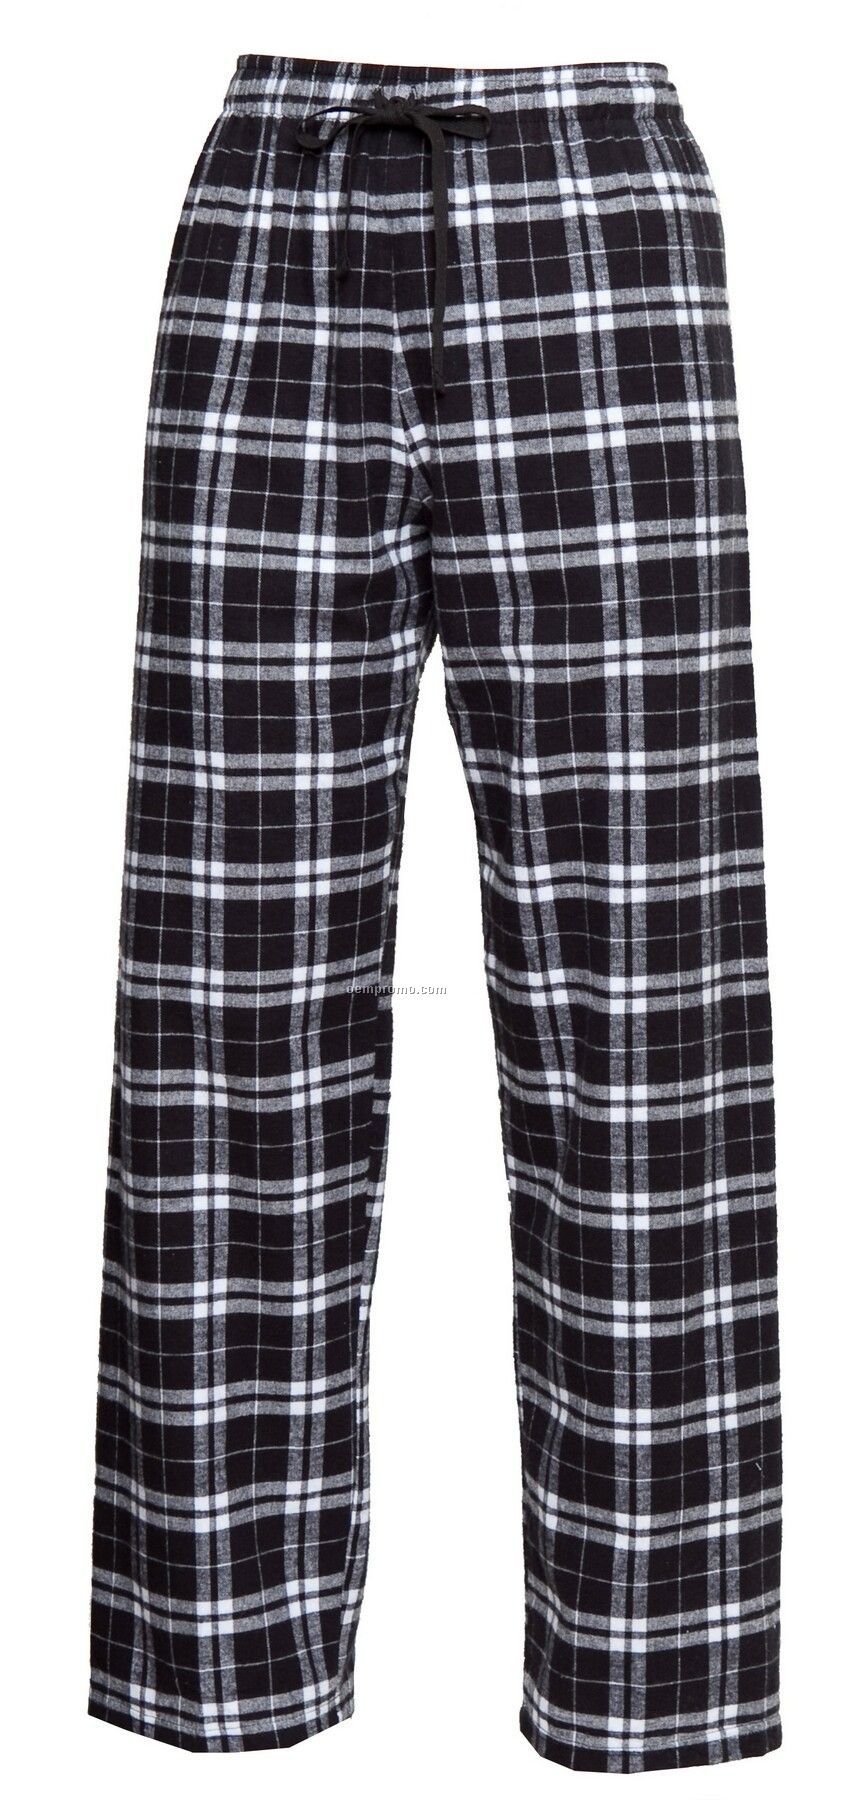 Youth Team Pride Flannel Pant In Black & White Plaid